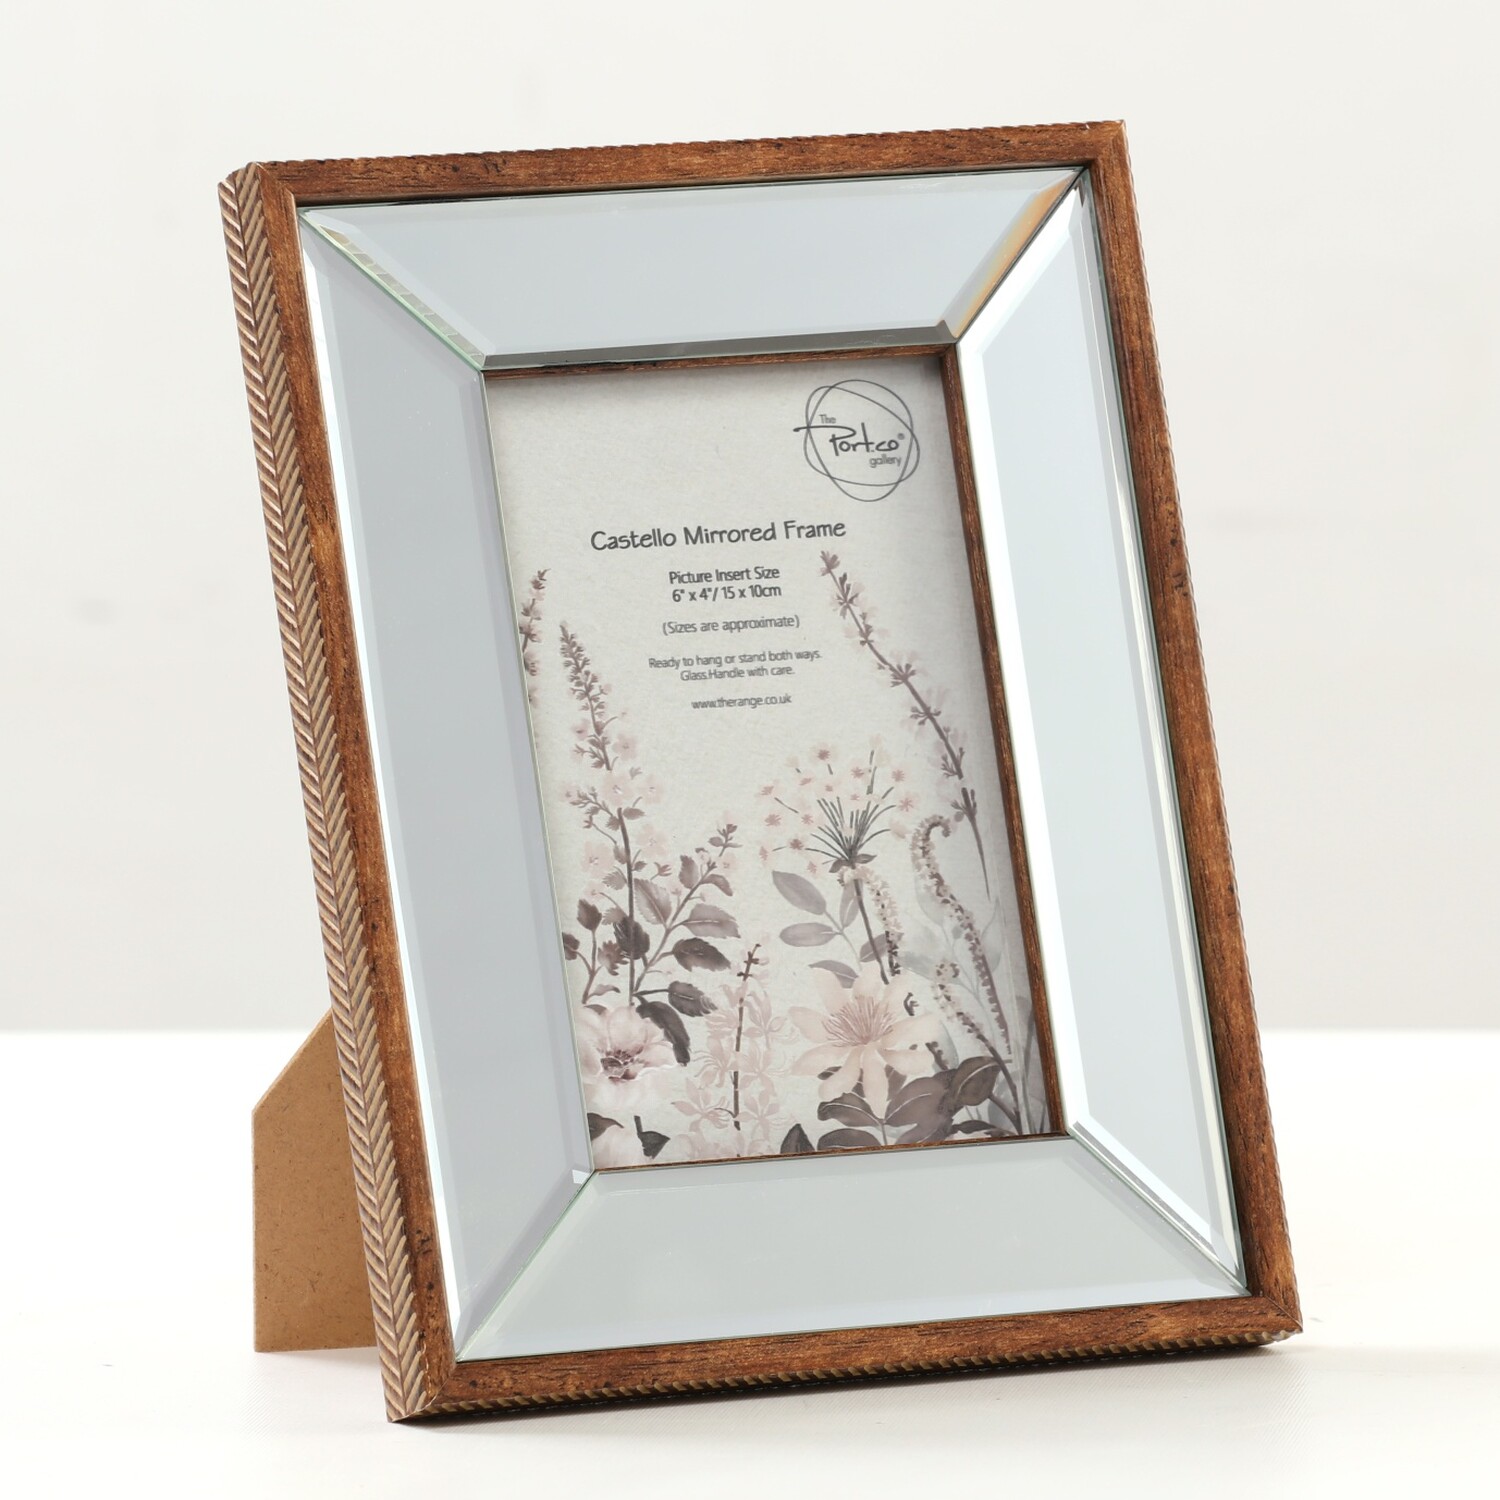 The Port. Co Gallery Castello Mirrored Brown Photo Frame 6 x 4 inch Image 2